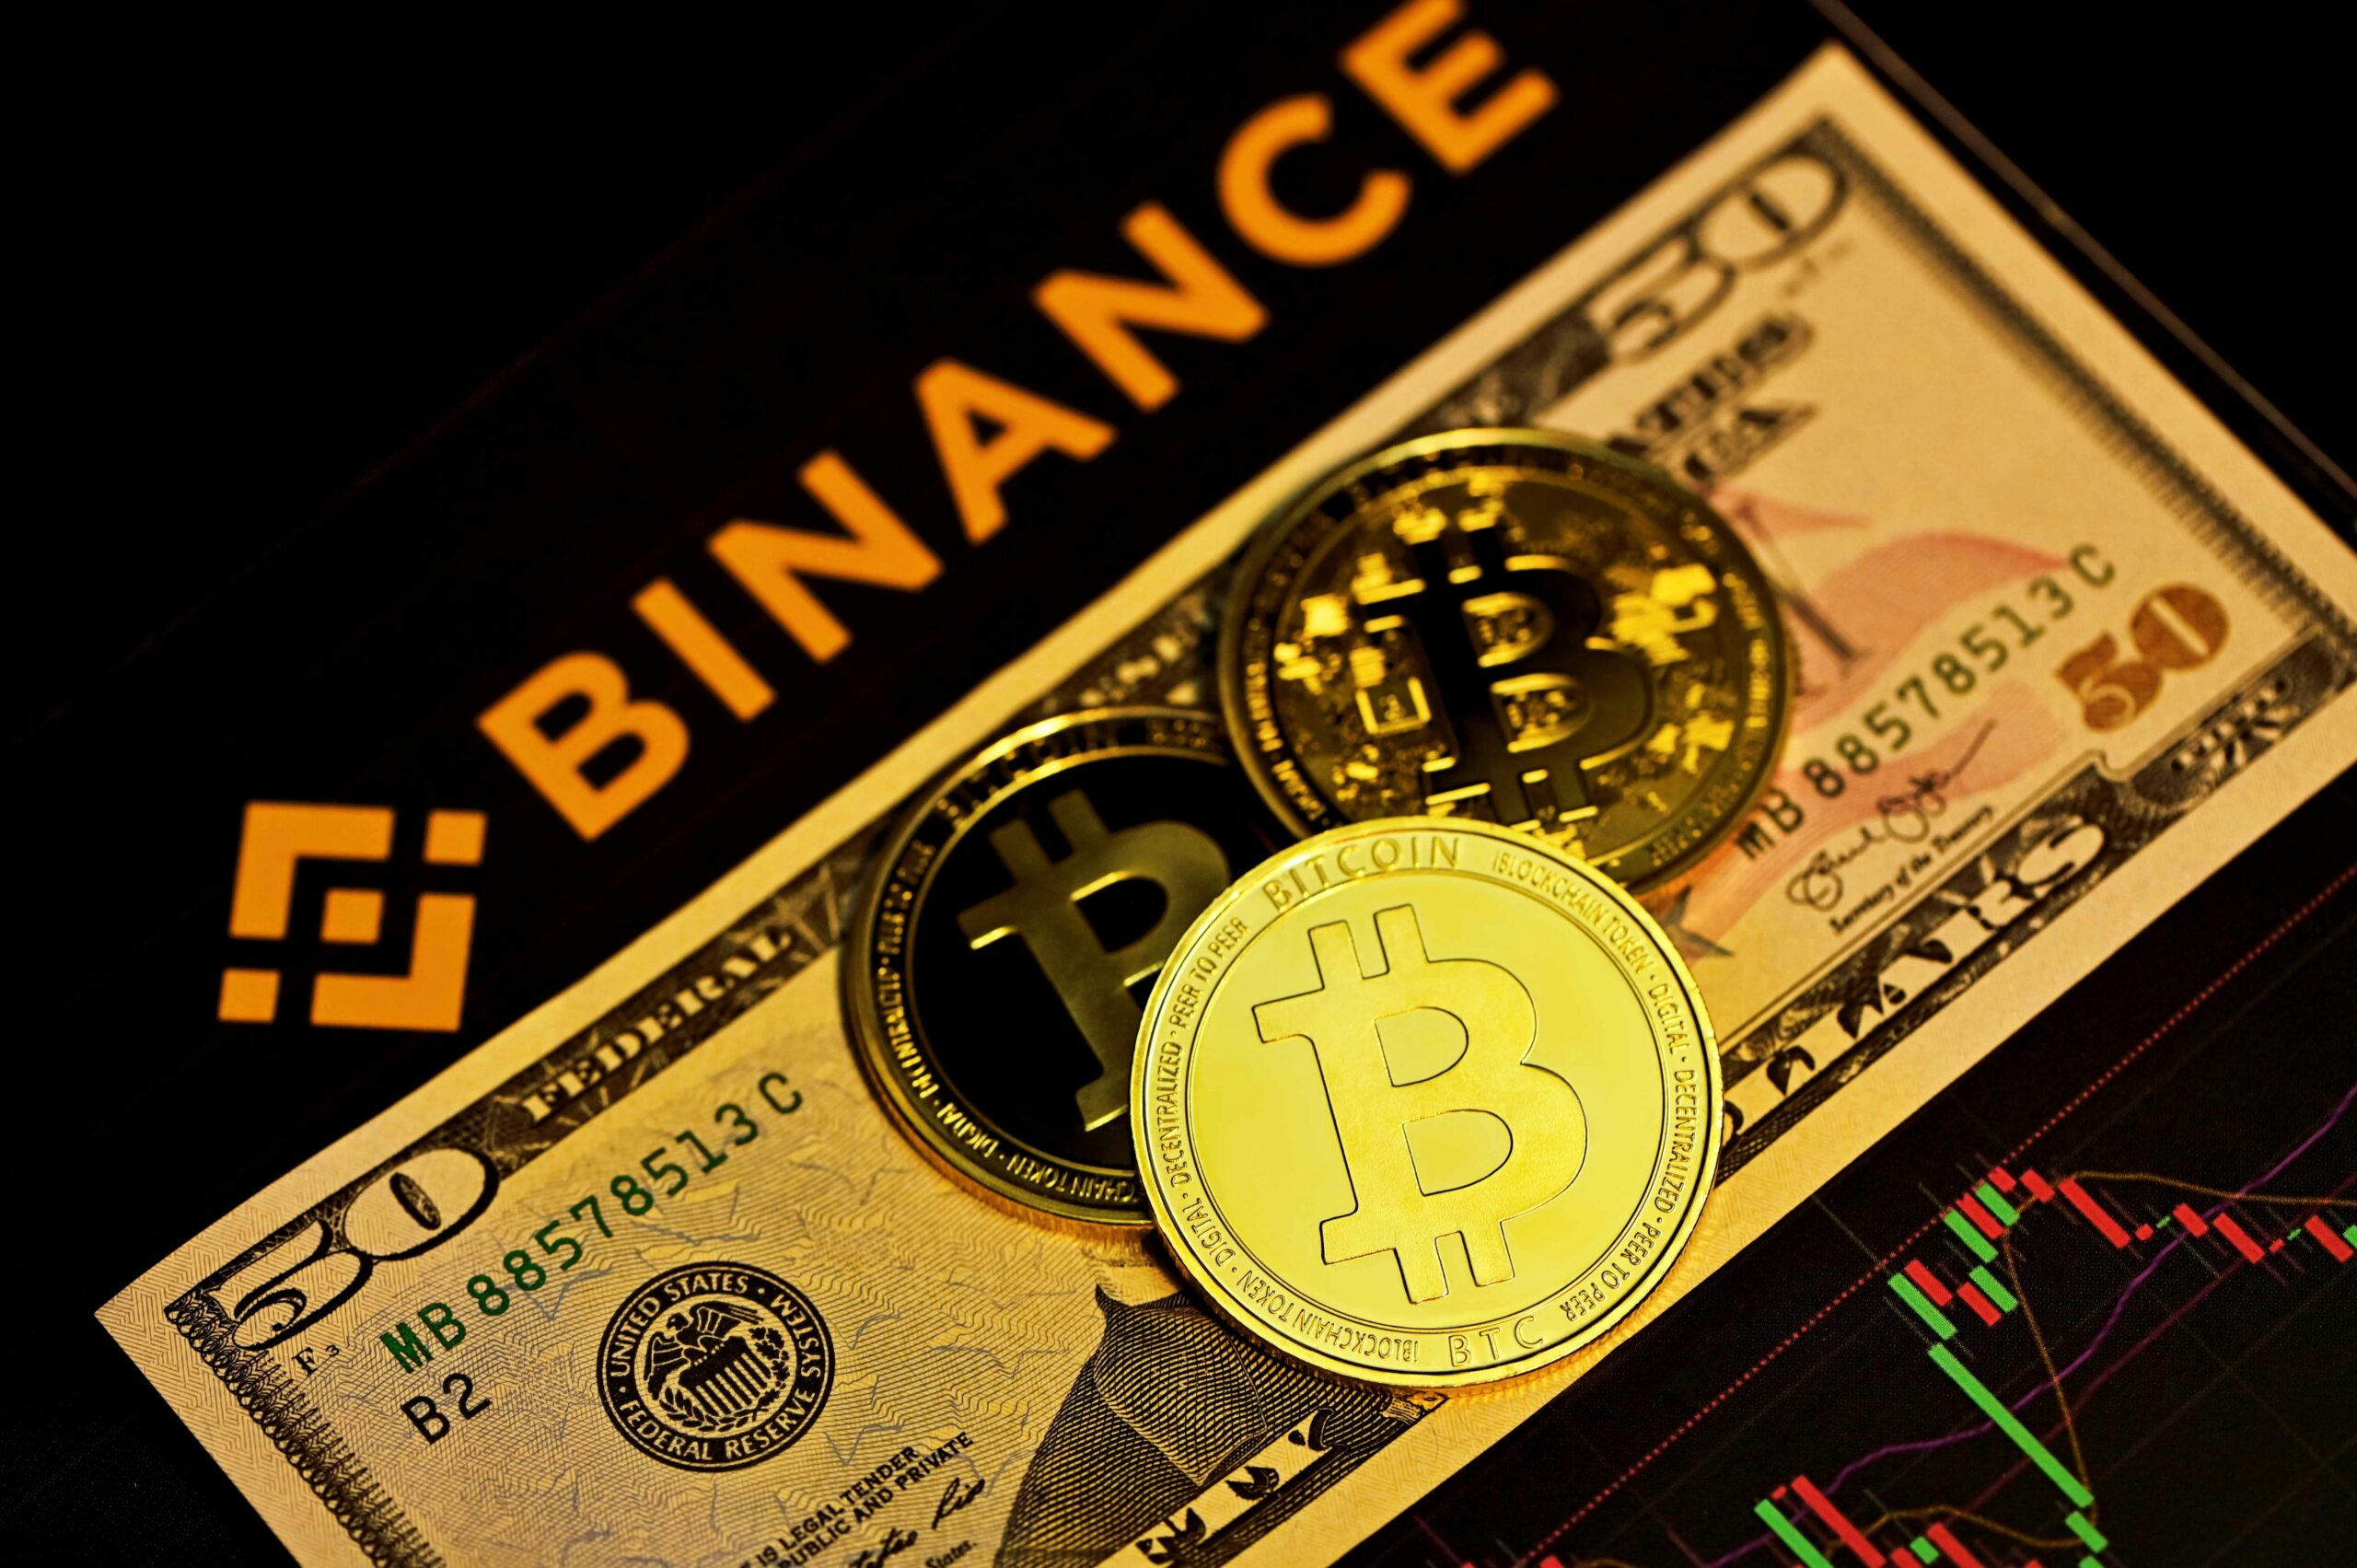 Binance Bolsters Security and Trust by Converting $1 Billion SAFU to USDC Stablecoin